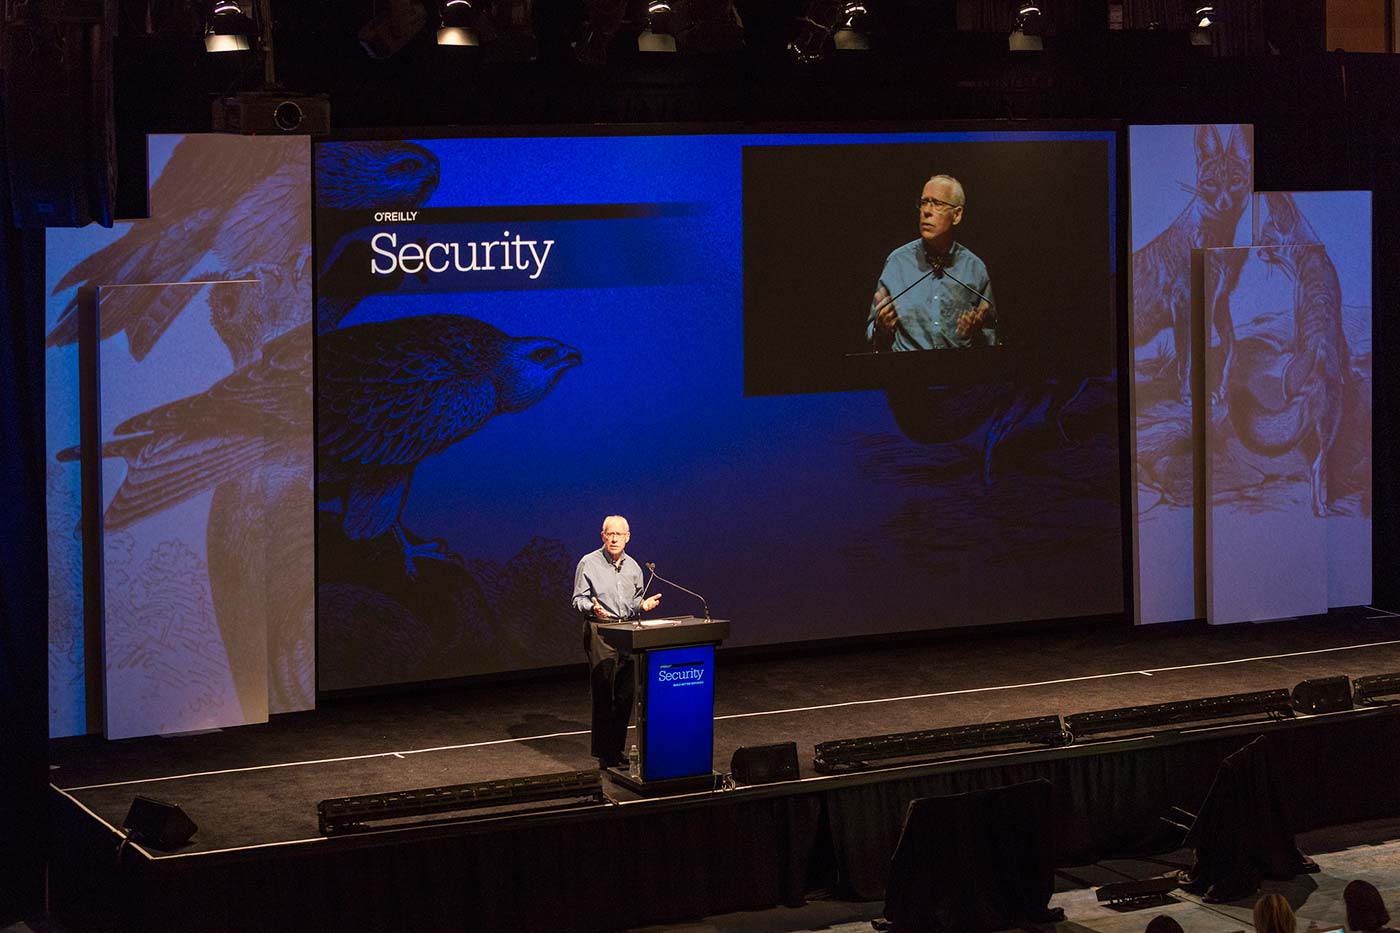 Keynote stage at the O'Reilly Security Conference in New York